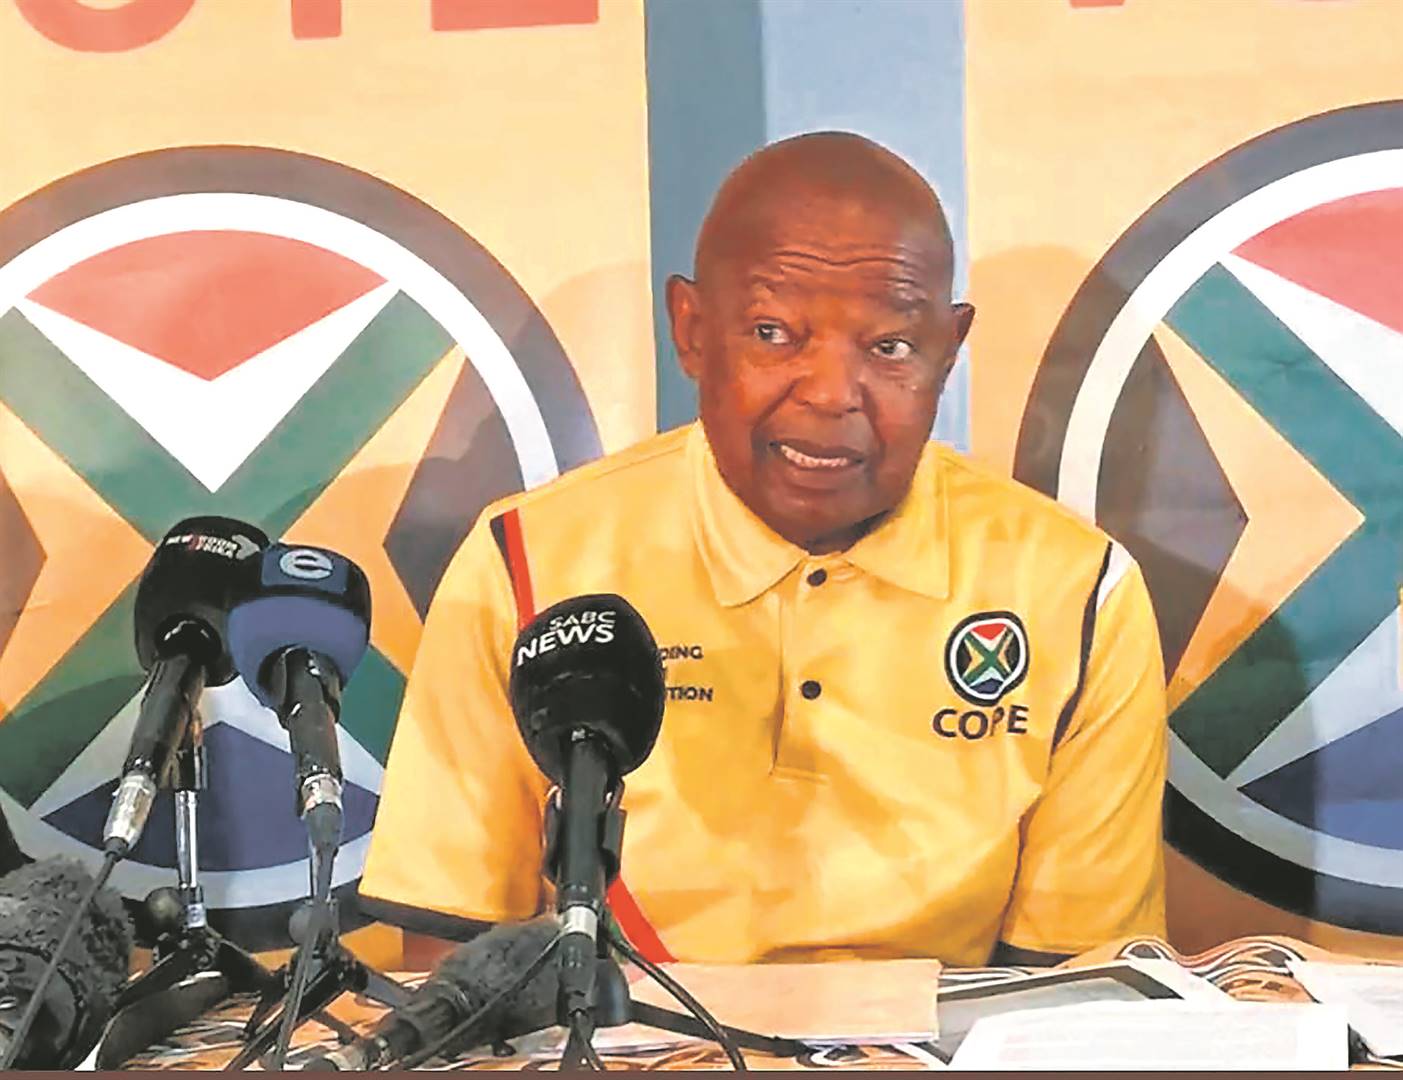 Cope leader Mosioua Lekota said only the party’s Congress National Committee can suspend him, and not three individuals.